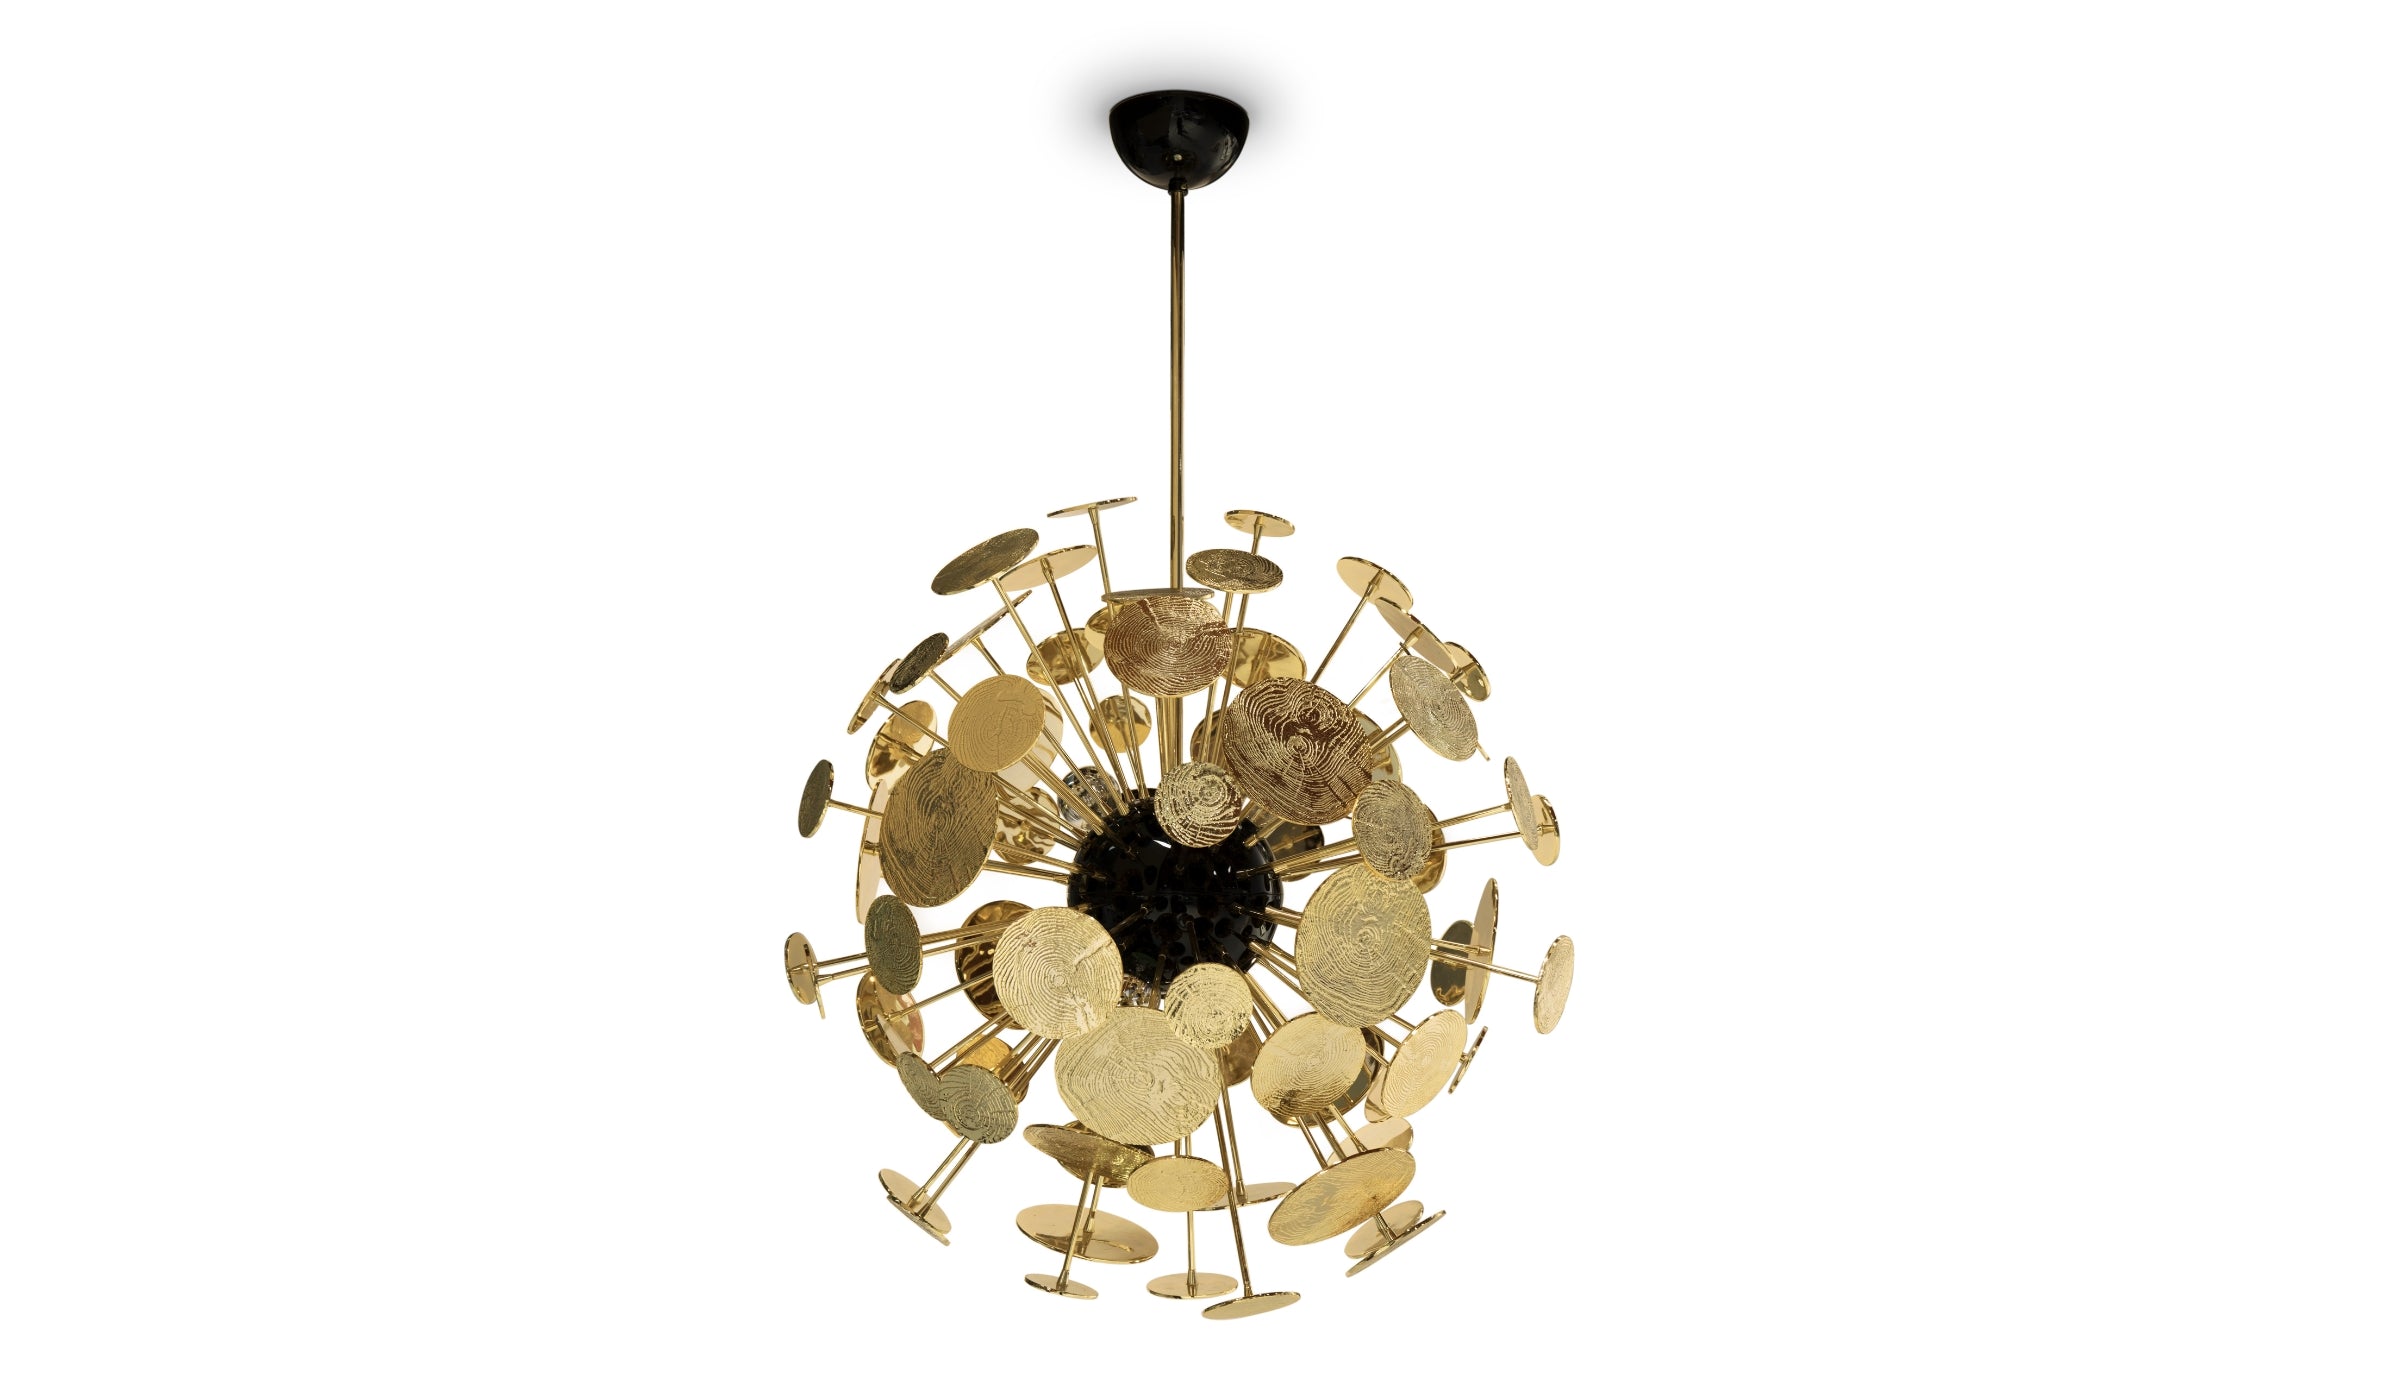 Newton - Exclusively designed pendant light in gold-plated aluminum